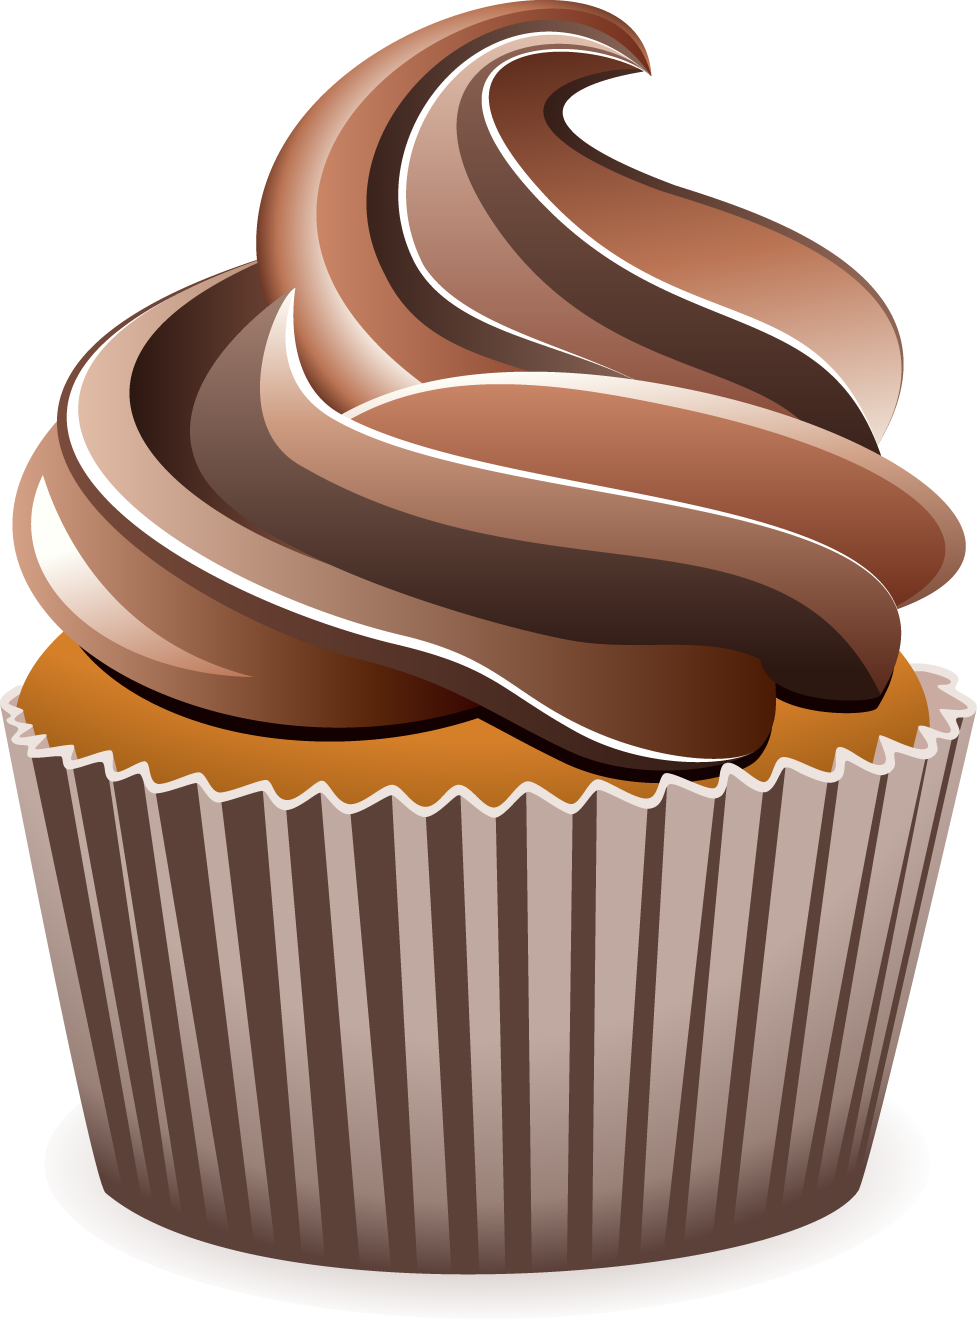 Desserts clipart homemade cake. Free cup download clip